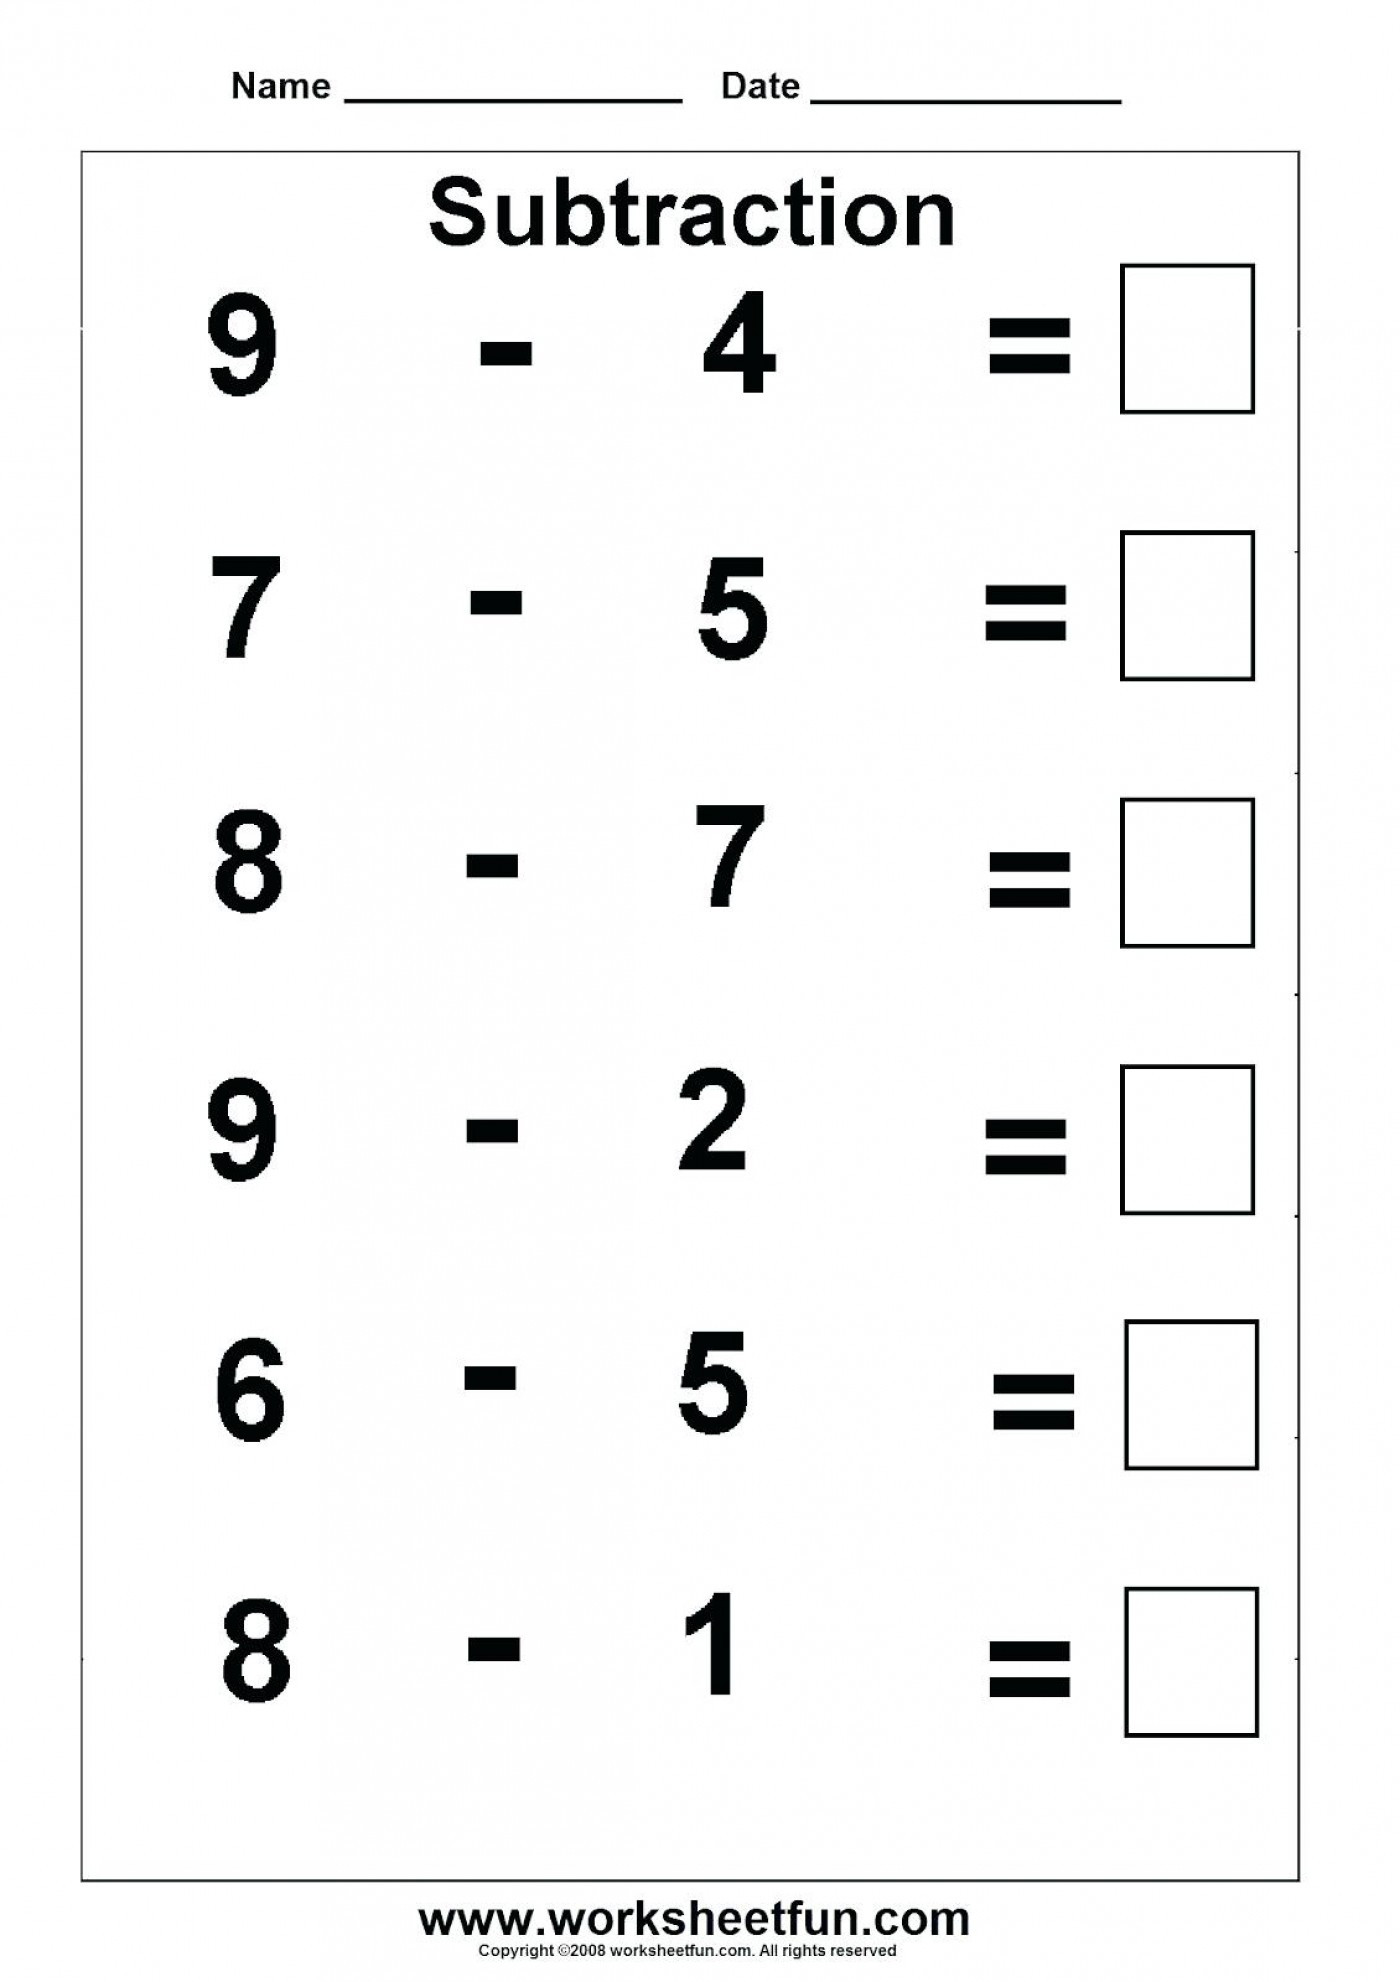 Free Math Worksheets First Grade 1 Subtraction Subtracting whole Tens Missing Number